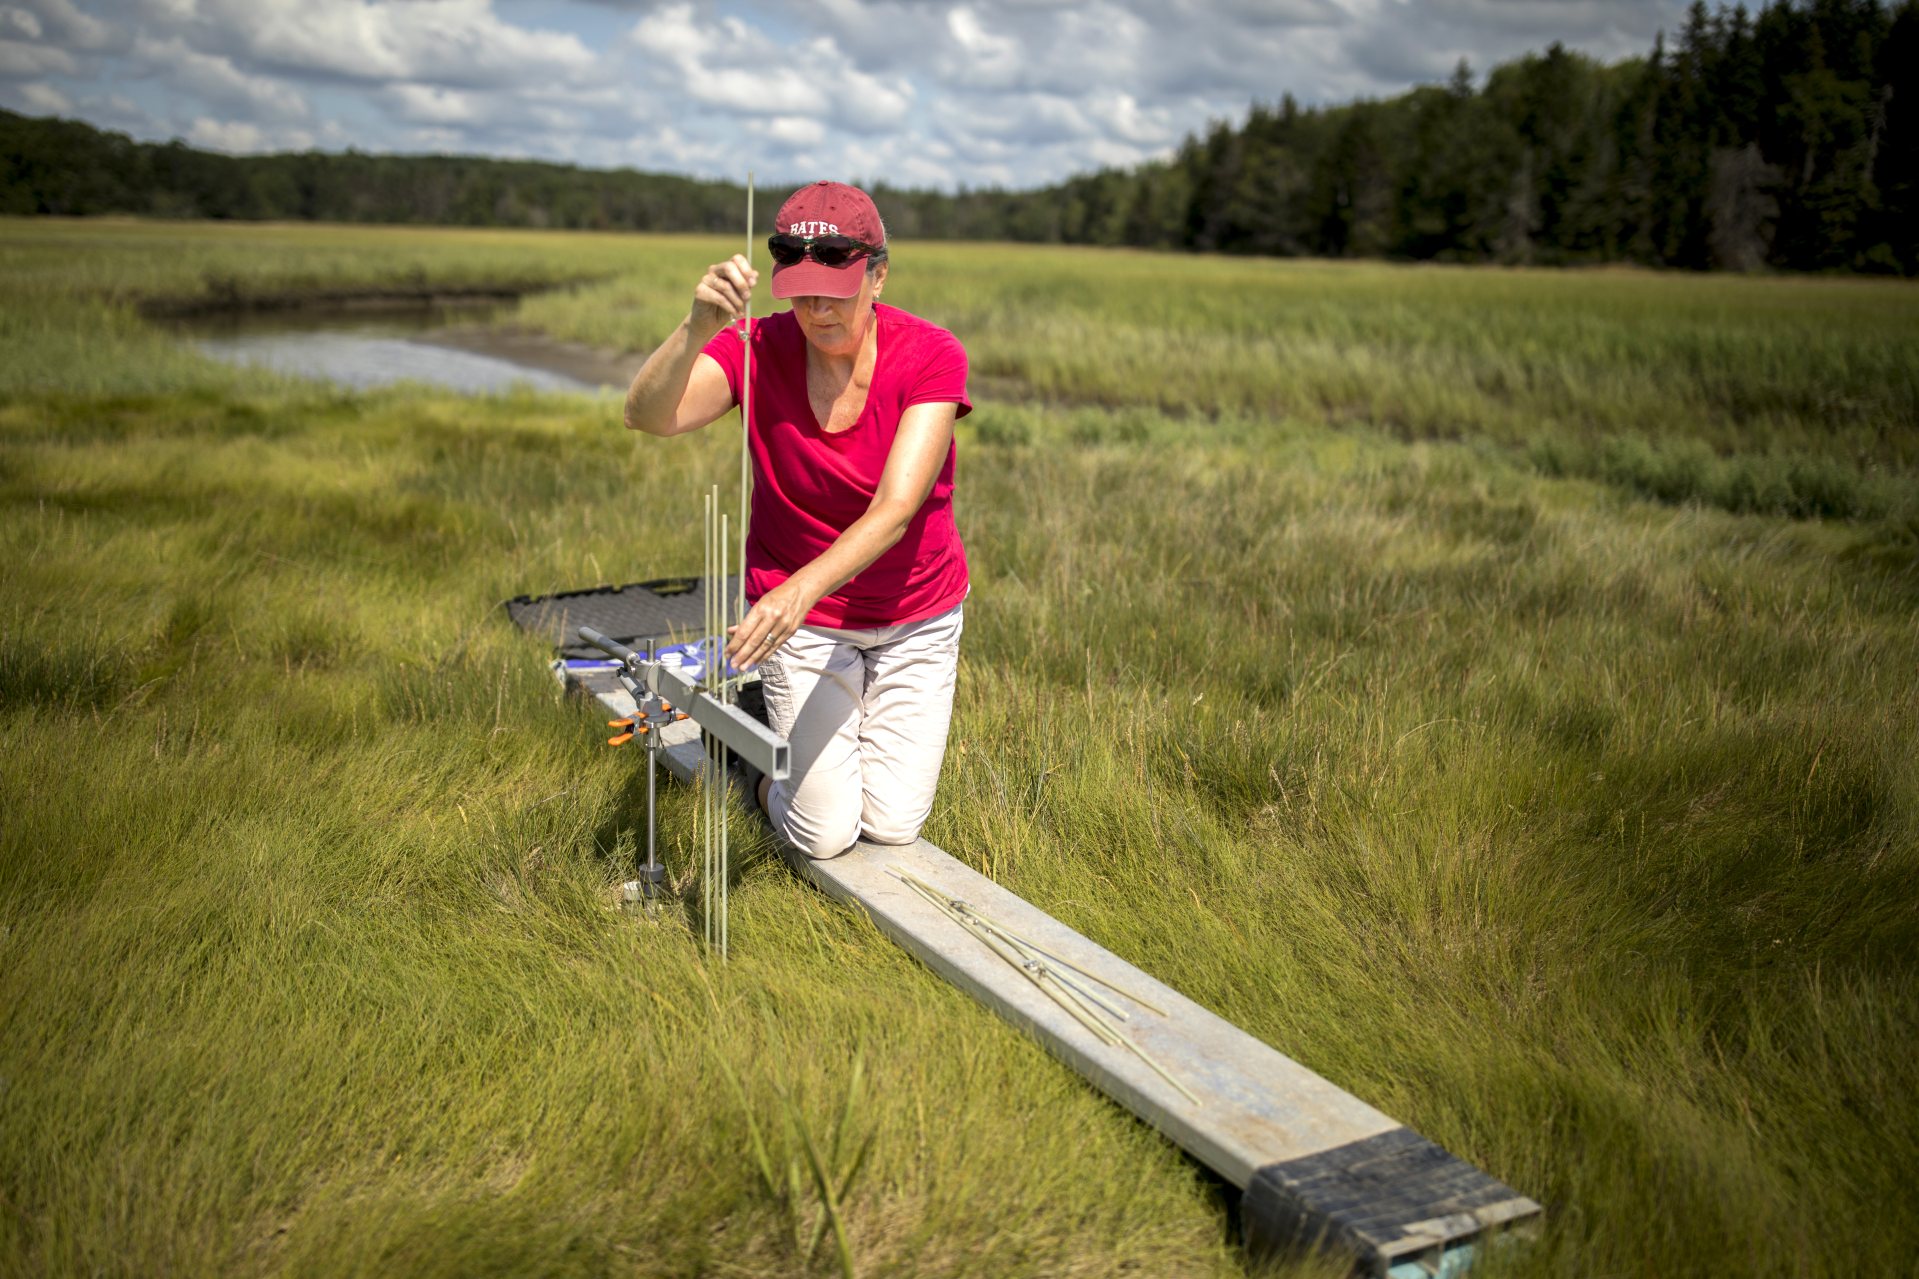 Professor of Geology Beverly Johnson uses a sediment elevation table to measure the height of the Sprague River Salt Marsh, part of the Bates–Morse Mountain Conservation Area.
.
These data are used to measure the response of the marsh to rising sea level and storm activity, Johnson says. Four years ago, she and her Short Term geology students traveled to the Sprague, where they placed rods deep in the marsh as benchmarks to measure future changes.

Show with Laura Sweall (in garnet baseball cap), Harward Center for Community Partnerships, Director of Bates Morse Mountain Conservation Area, and Vanessa Paolella '21 of Dingmen's Ferry, Pa., who has been working with Johnson on geology research over the summer.

Also present: Clailre Enterline (in green shirt and blue baseball cap), Research Coordinator with the Maine Coastal Program. And (not in selects but wearing a blue baseball cap and blue shirt) Ellen Bartow-Gieelie, Coastal Fellow with the Maine Coastal Program.